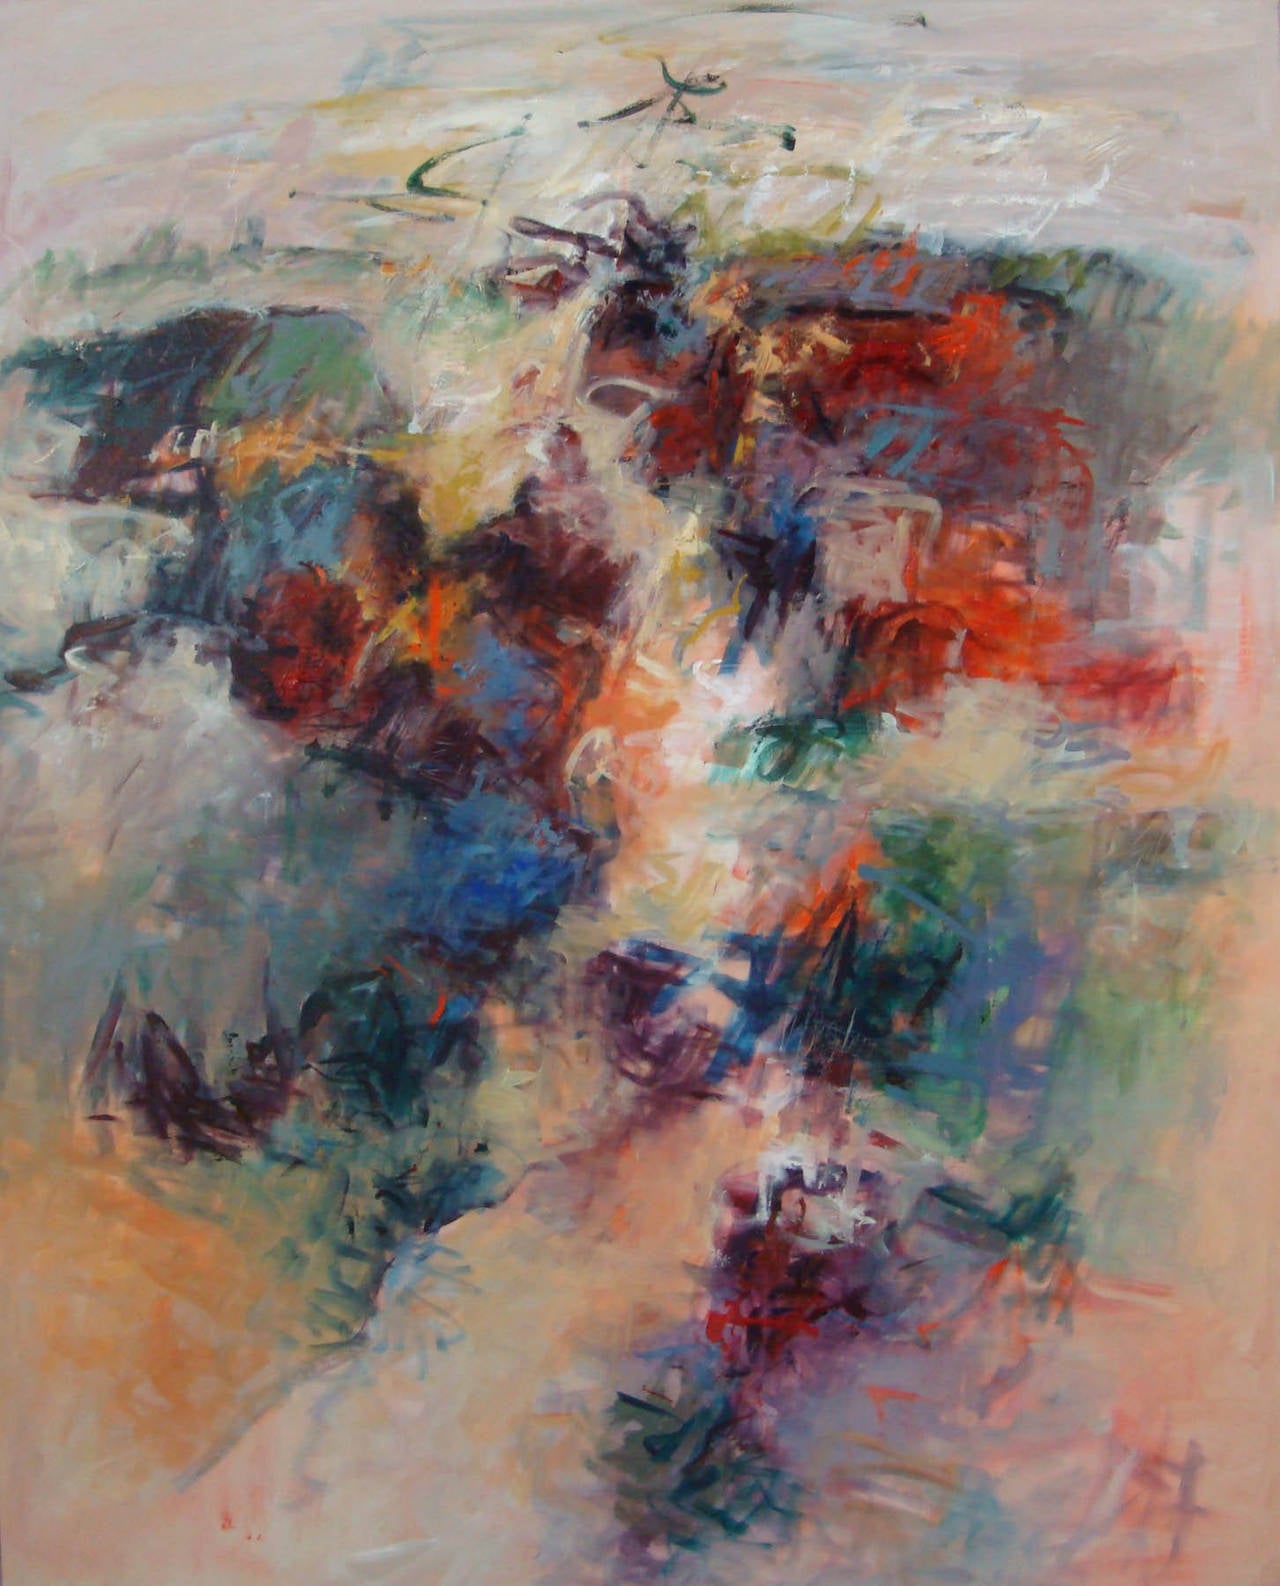 Mary Lou Siefker Abstract Painting - Acrylic Painting on Canvas Titled “Celebration IV”